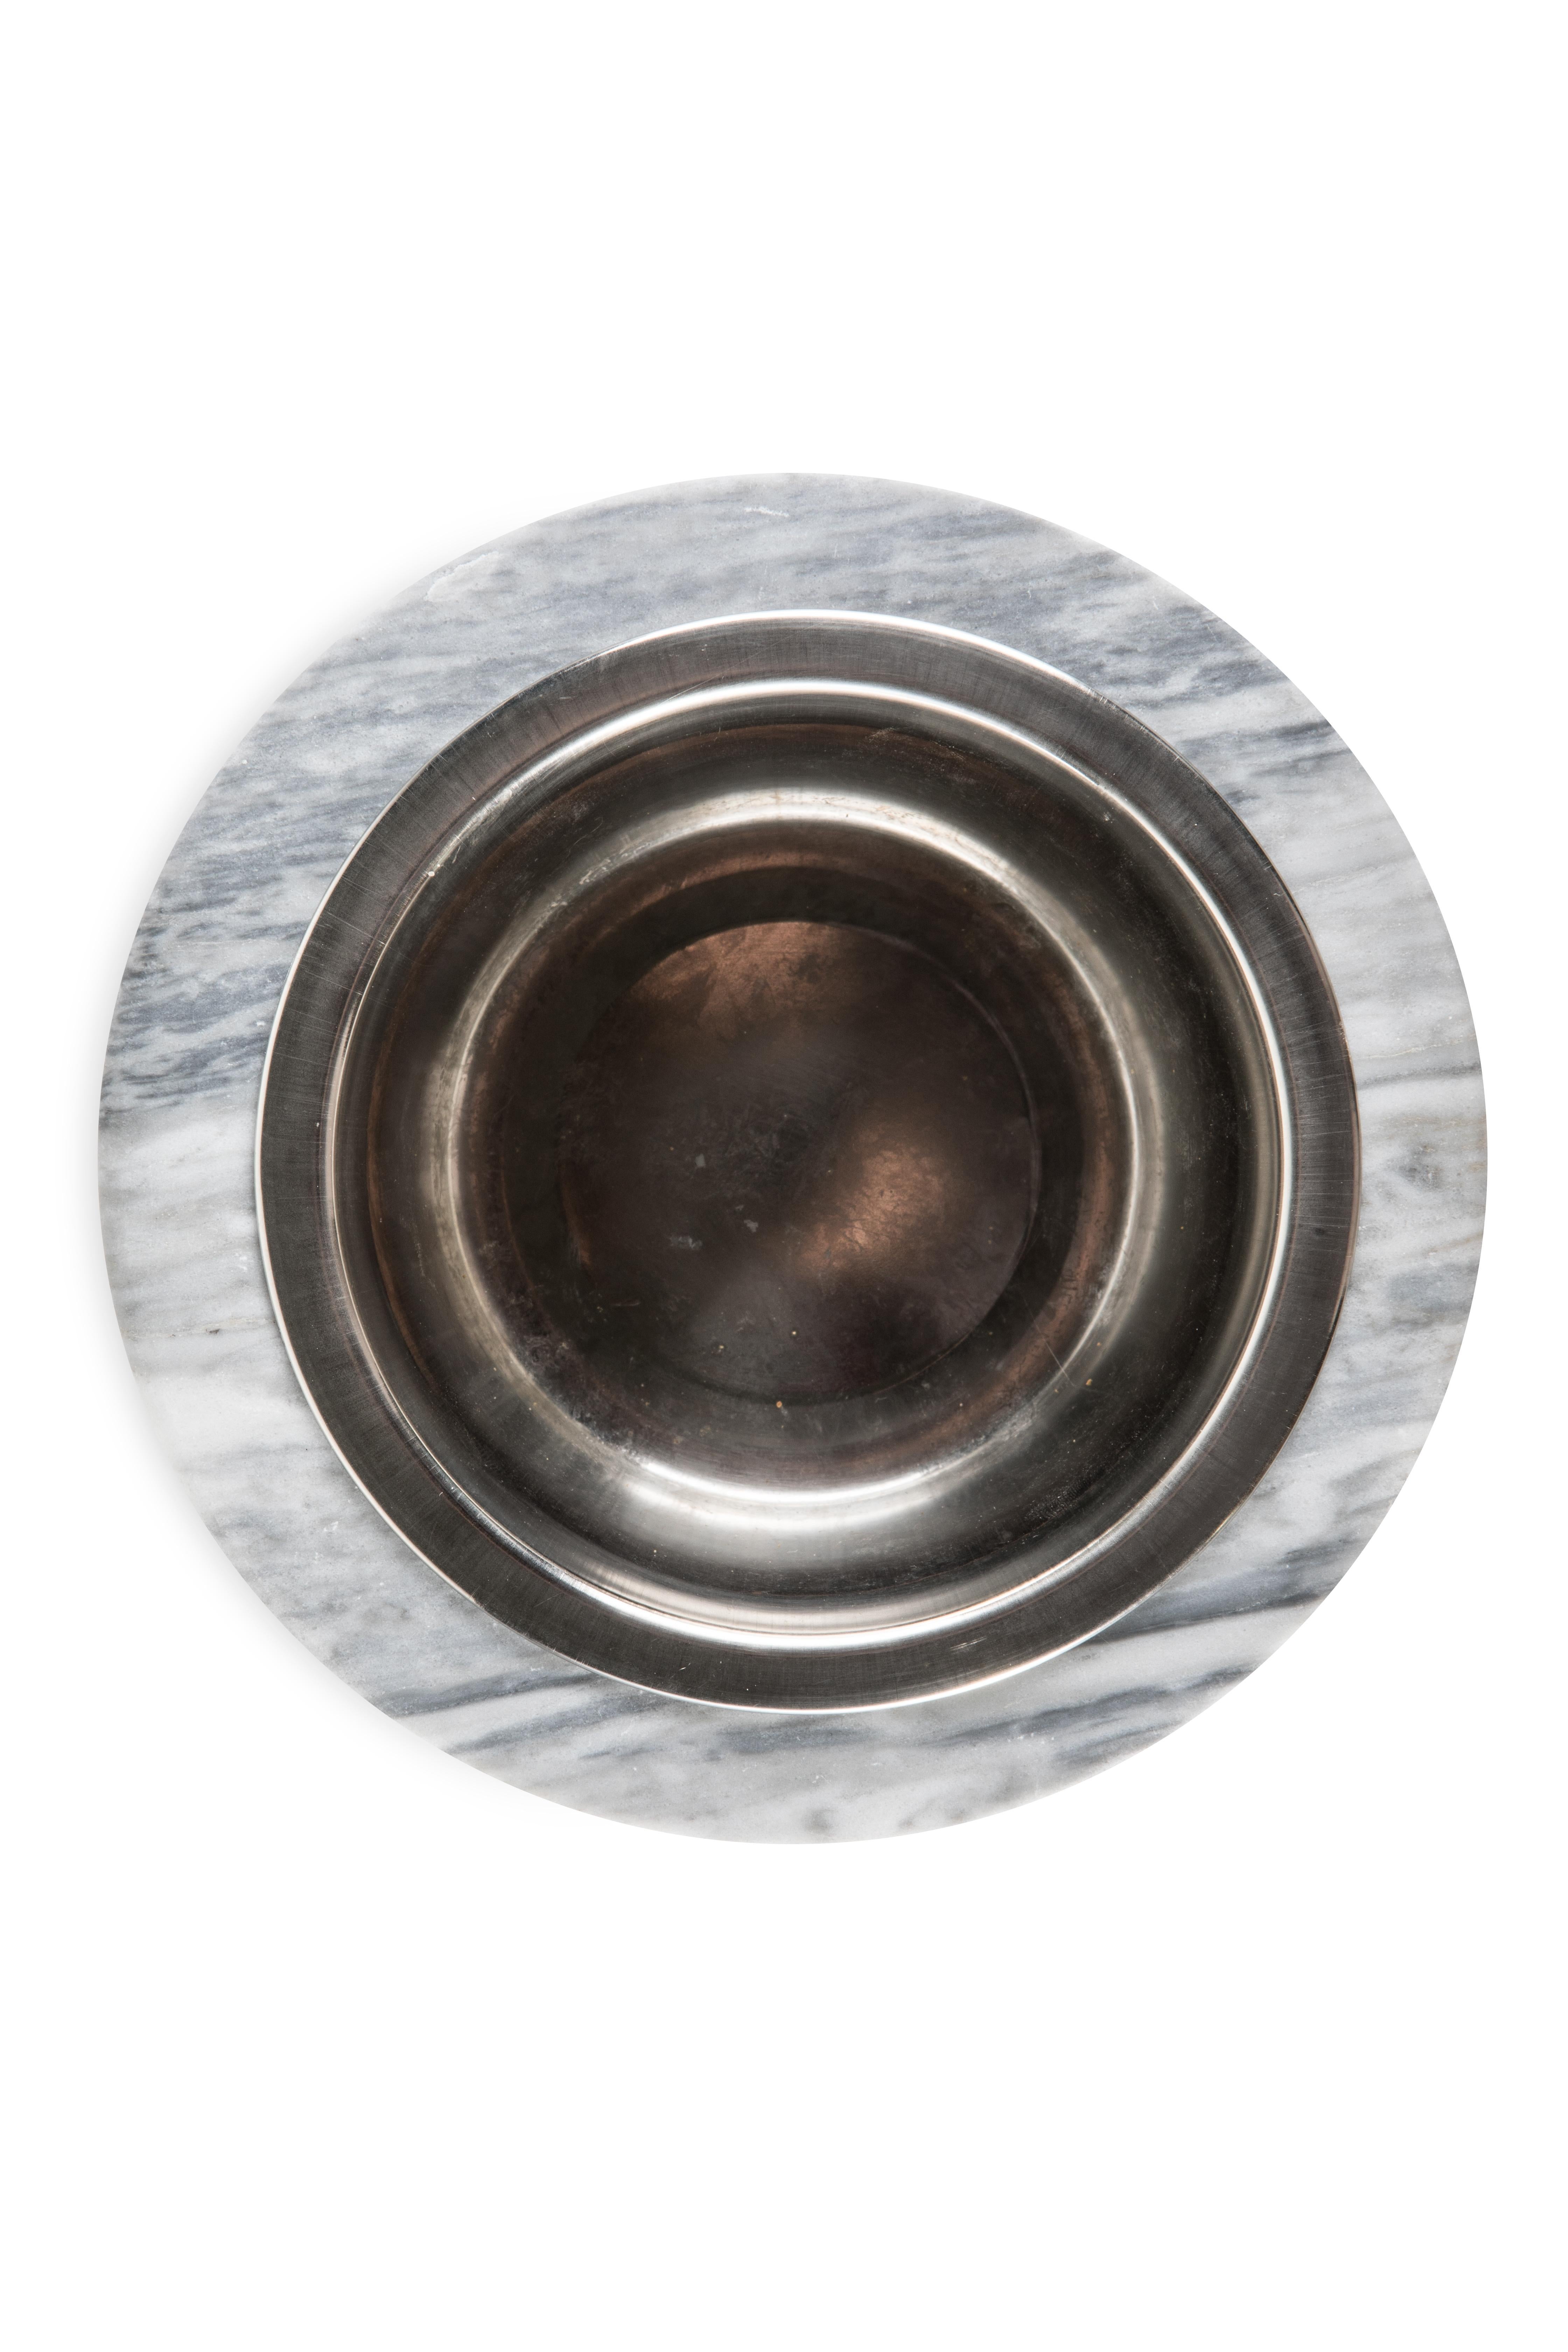 Rounded grey Bardiglio marble bowl for cats and dogs with removable stainless steel bowl, made in Italy, Carrara. Size medium.
Each piece is in a way unique (every marble block is different in veins and shades) and handmade by Italian artisans